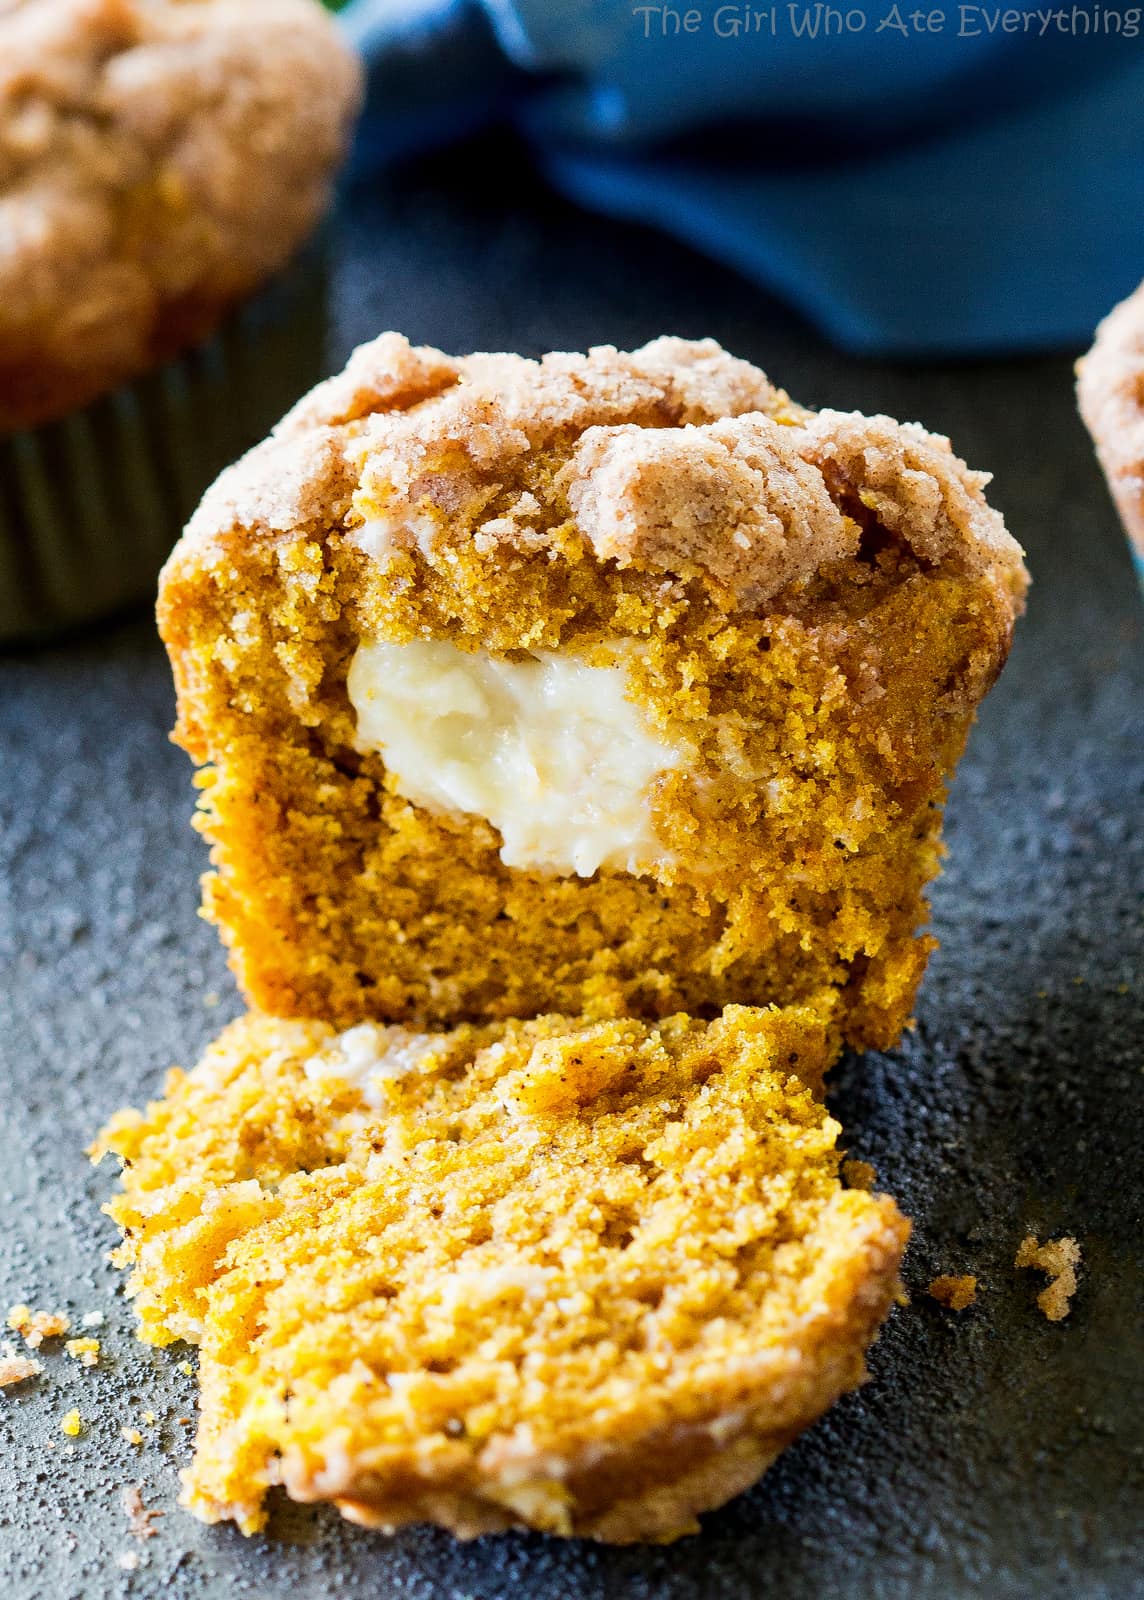 https://www.the-girl-who-ate-everything.com/wp-content/uploads/2011/10/pumpklin-cream-cheese-muffins-6-1.jpg